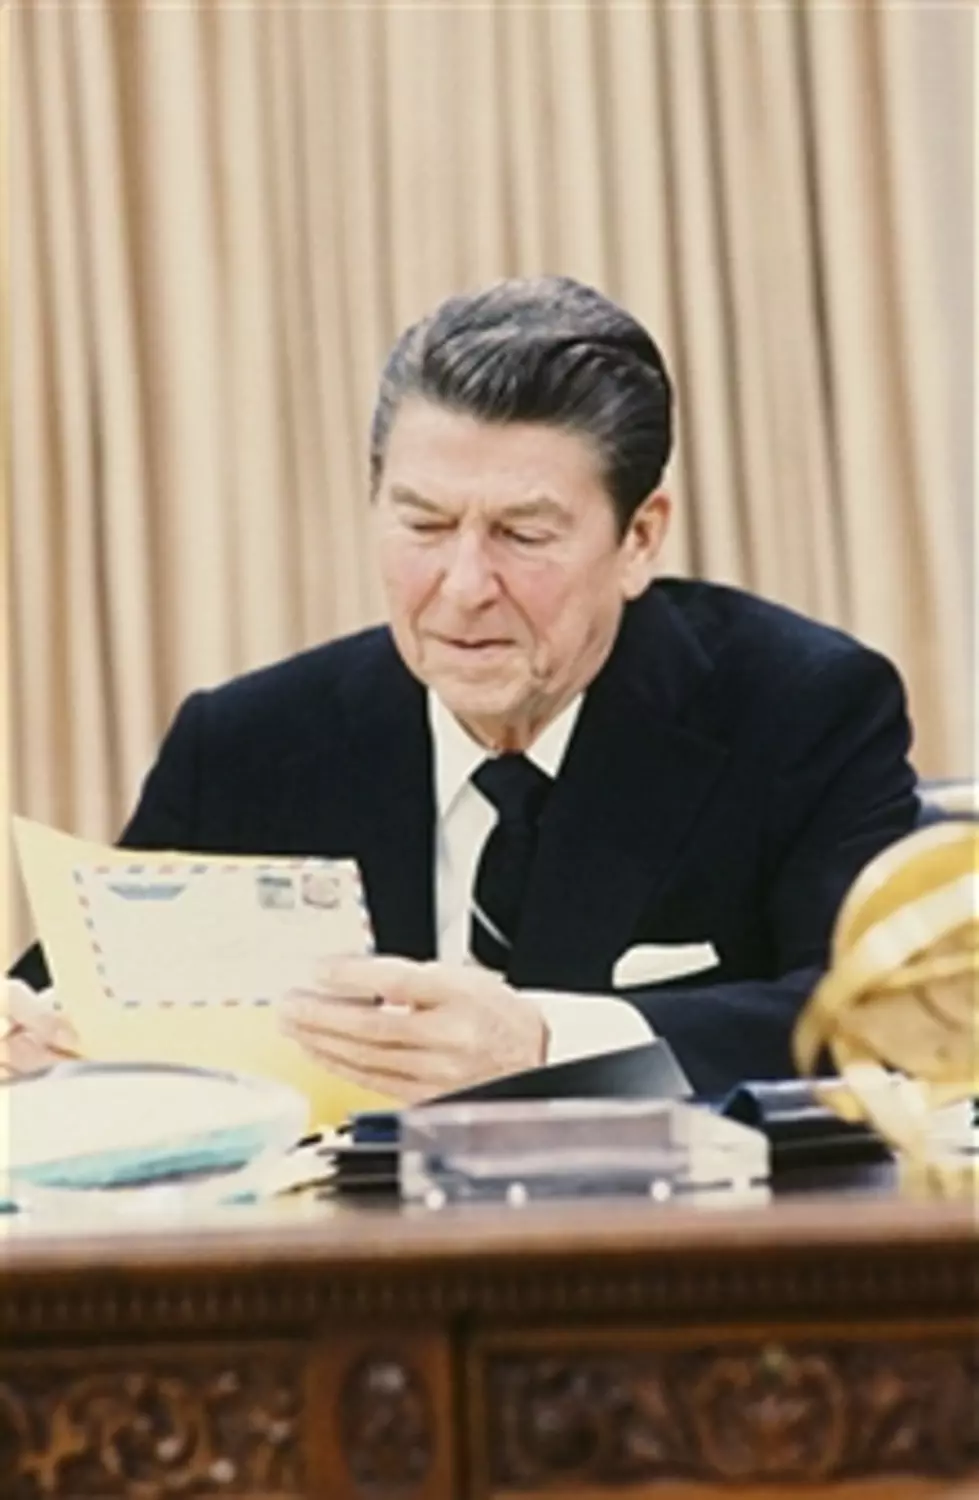 Handwritten Reagan Letter and Check For Sale